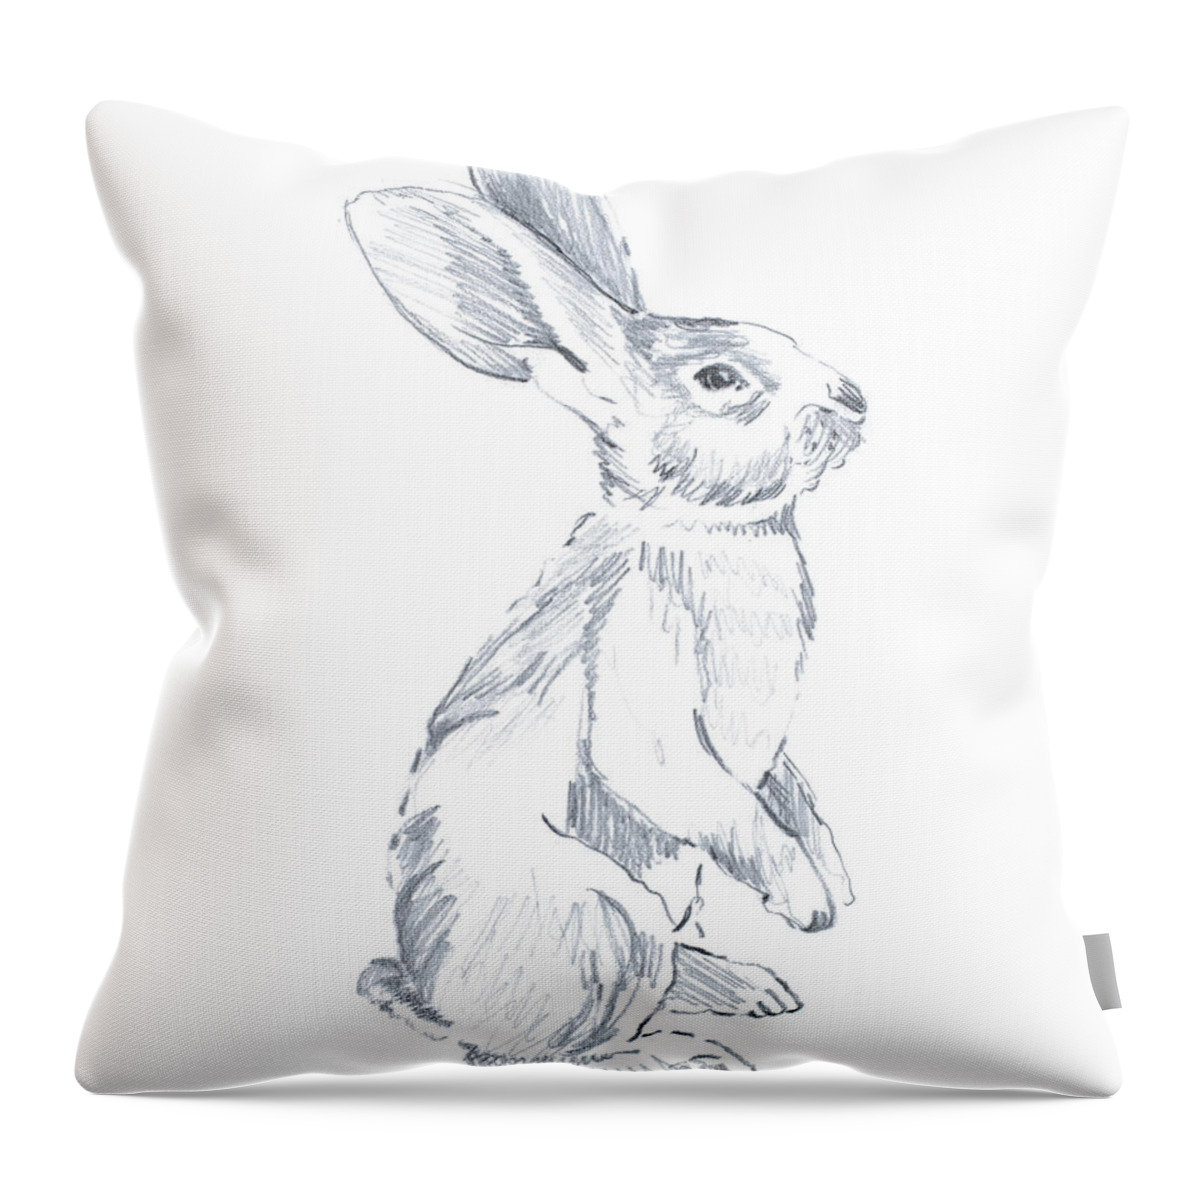 Sketched Throw Pillow featuring the drawing Sketched Rabbit I by Lanie Loreth